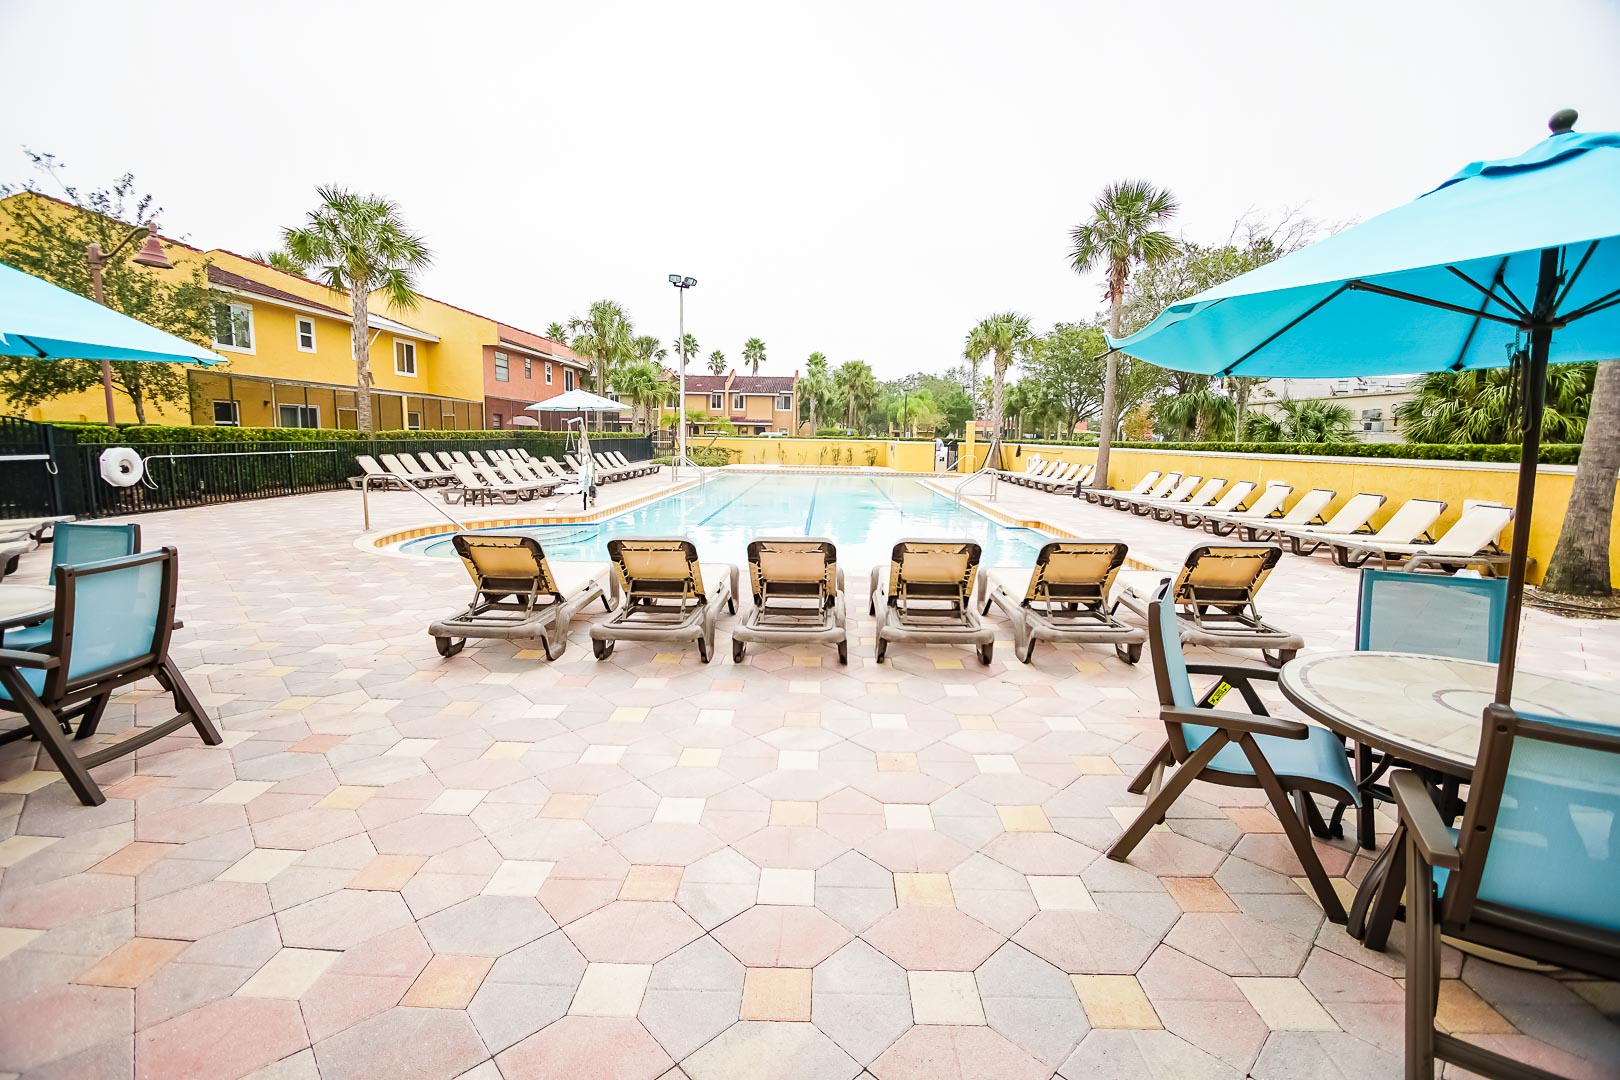 A relaxing view of the outdoor swimming pool at VRI's Fantasy World Resort in Florida.